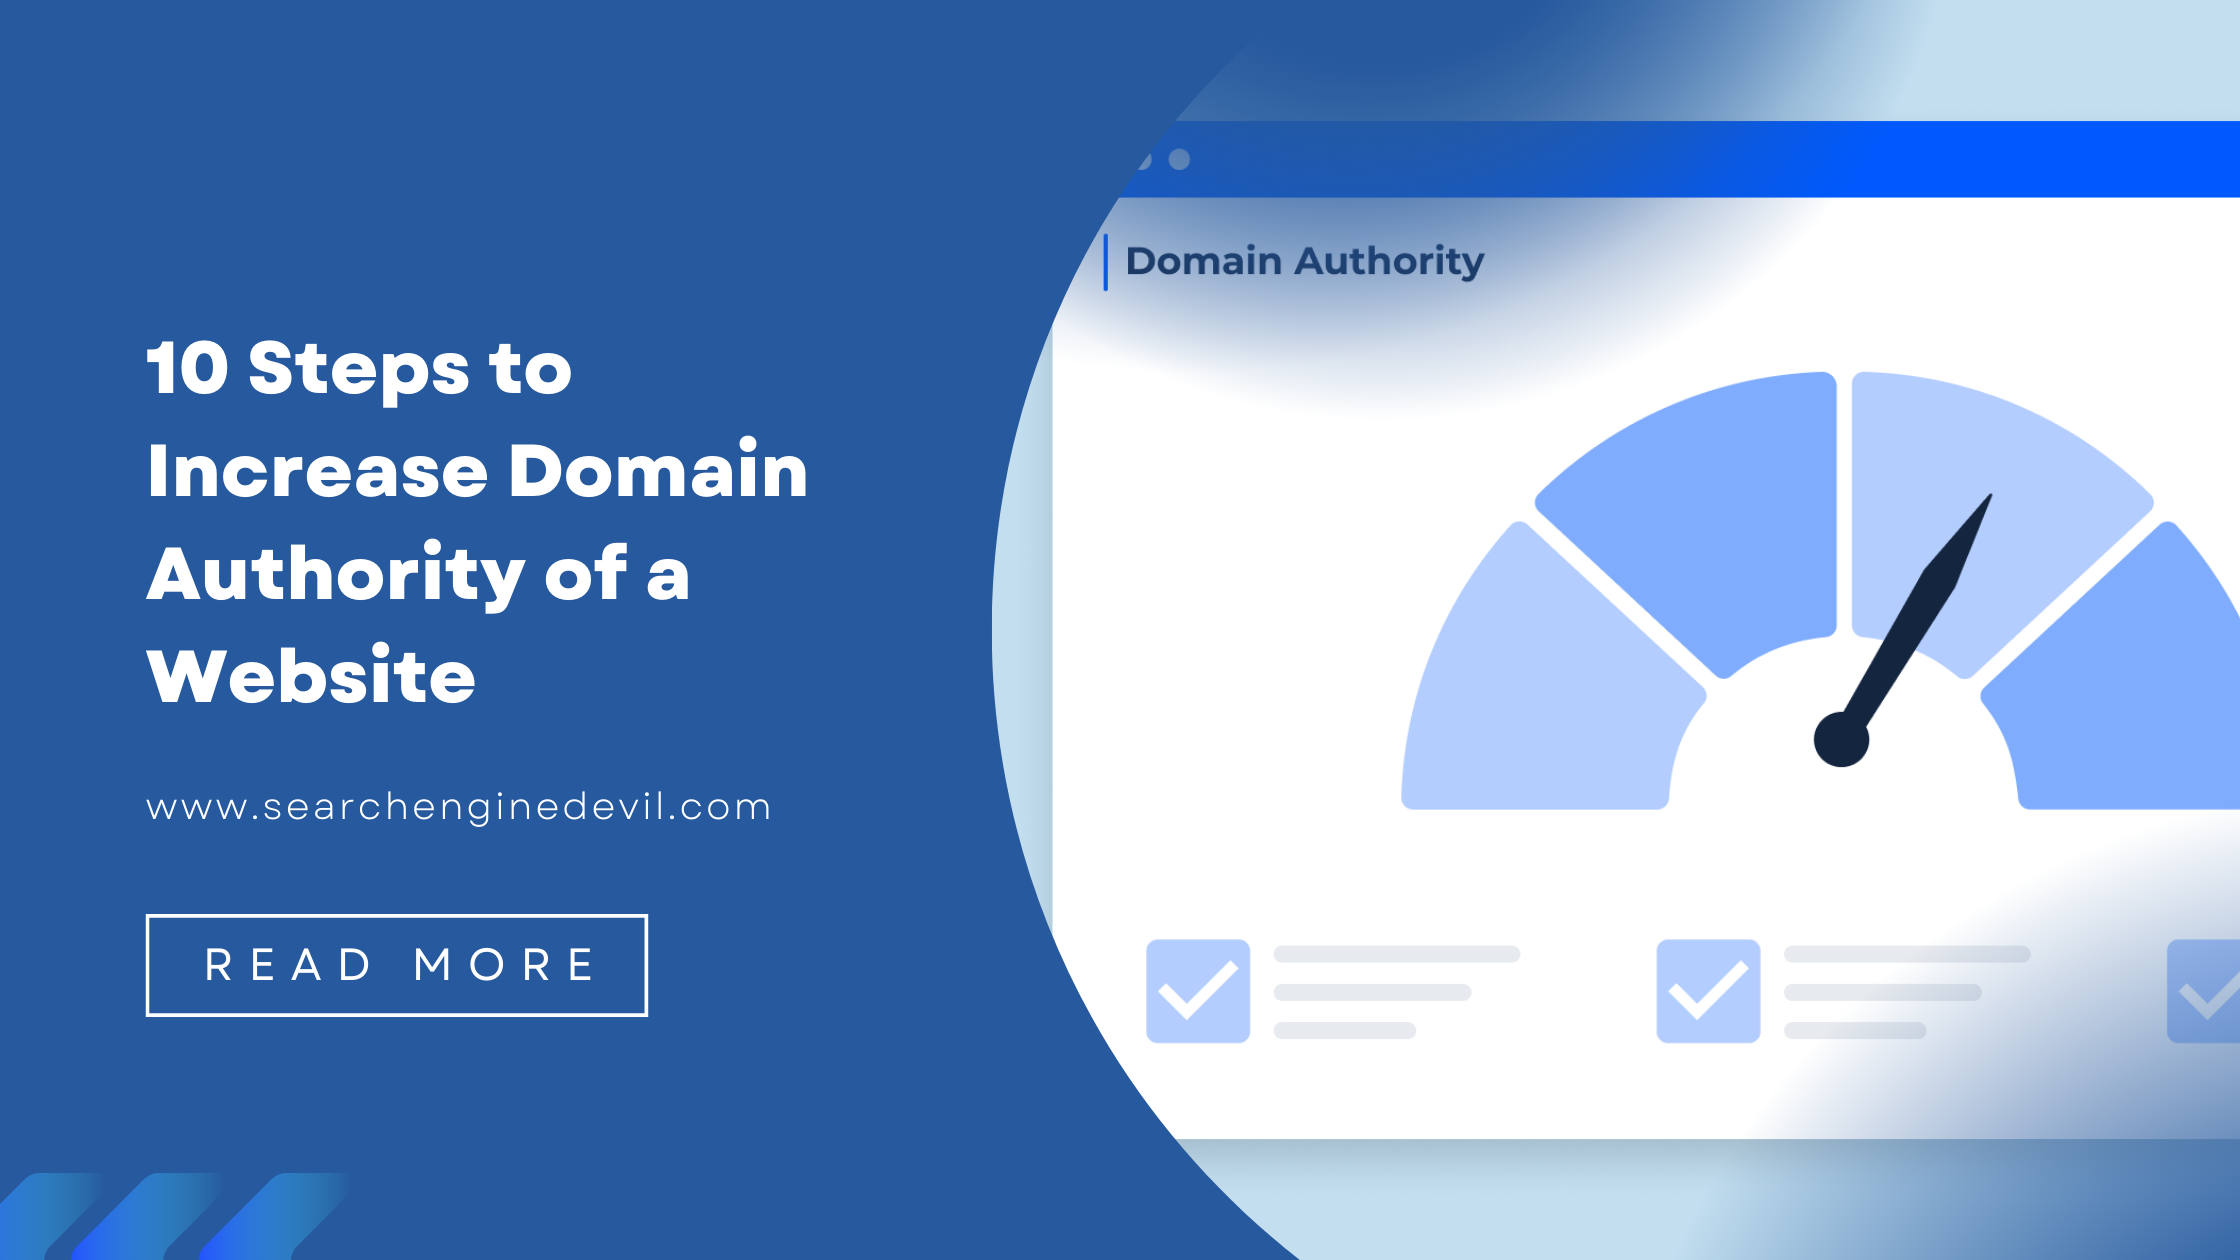 10 Steps to Increase Domain Authority of a Website